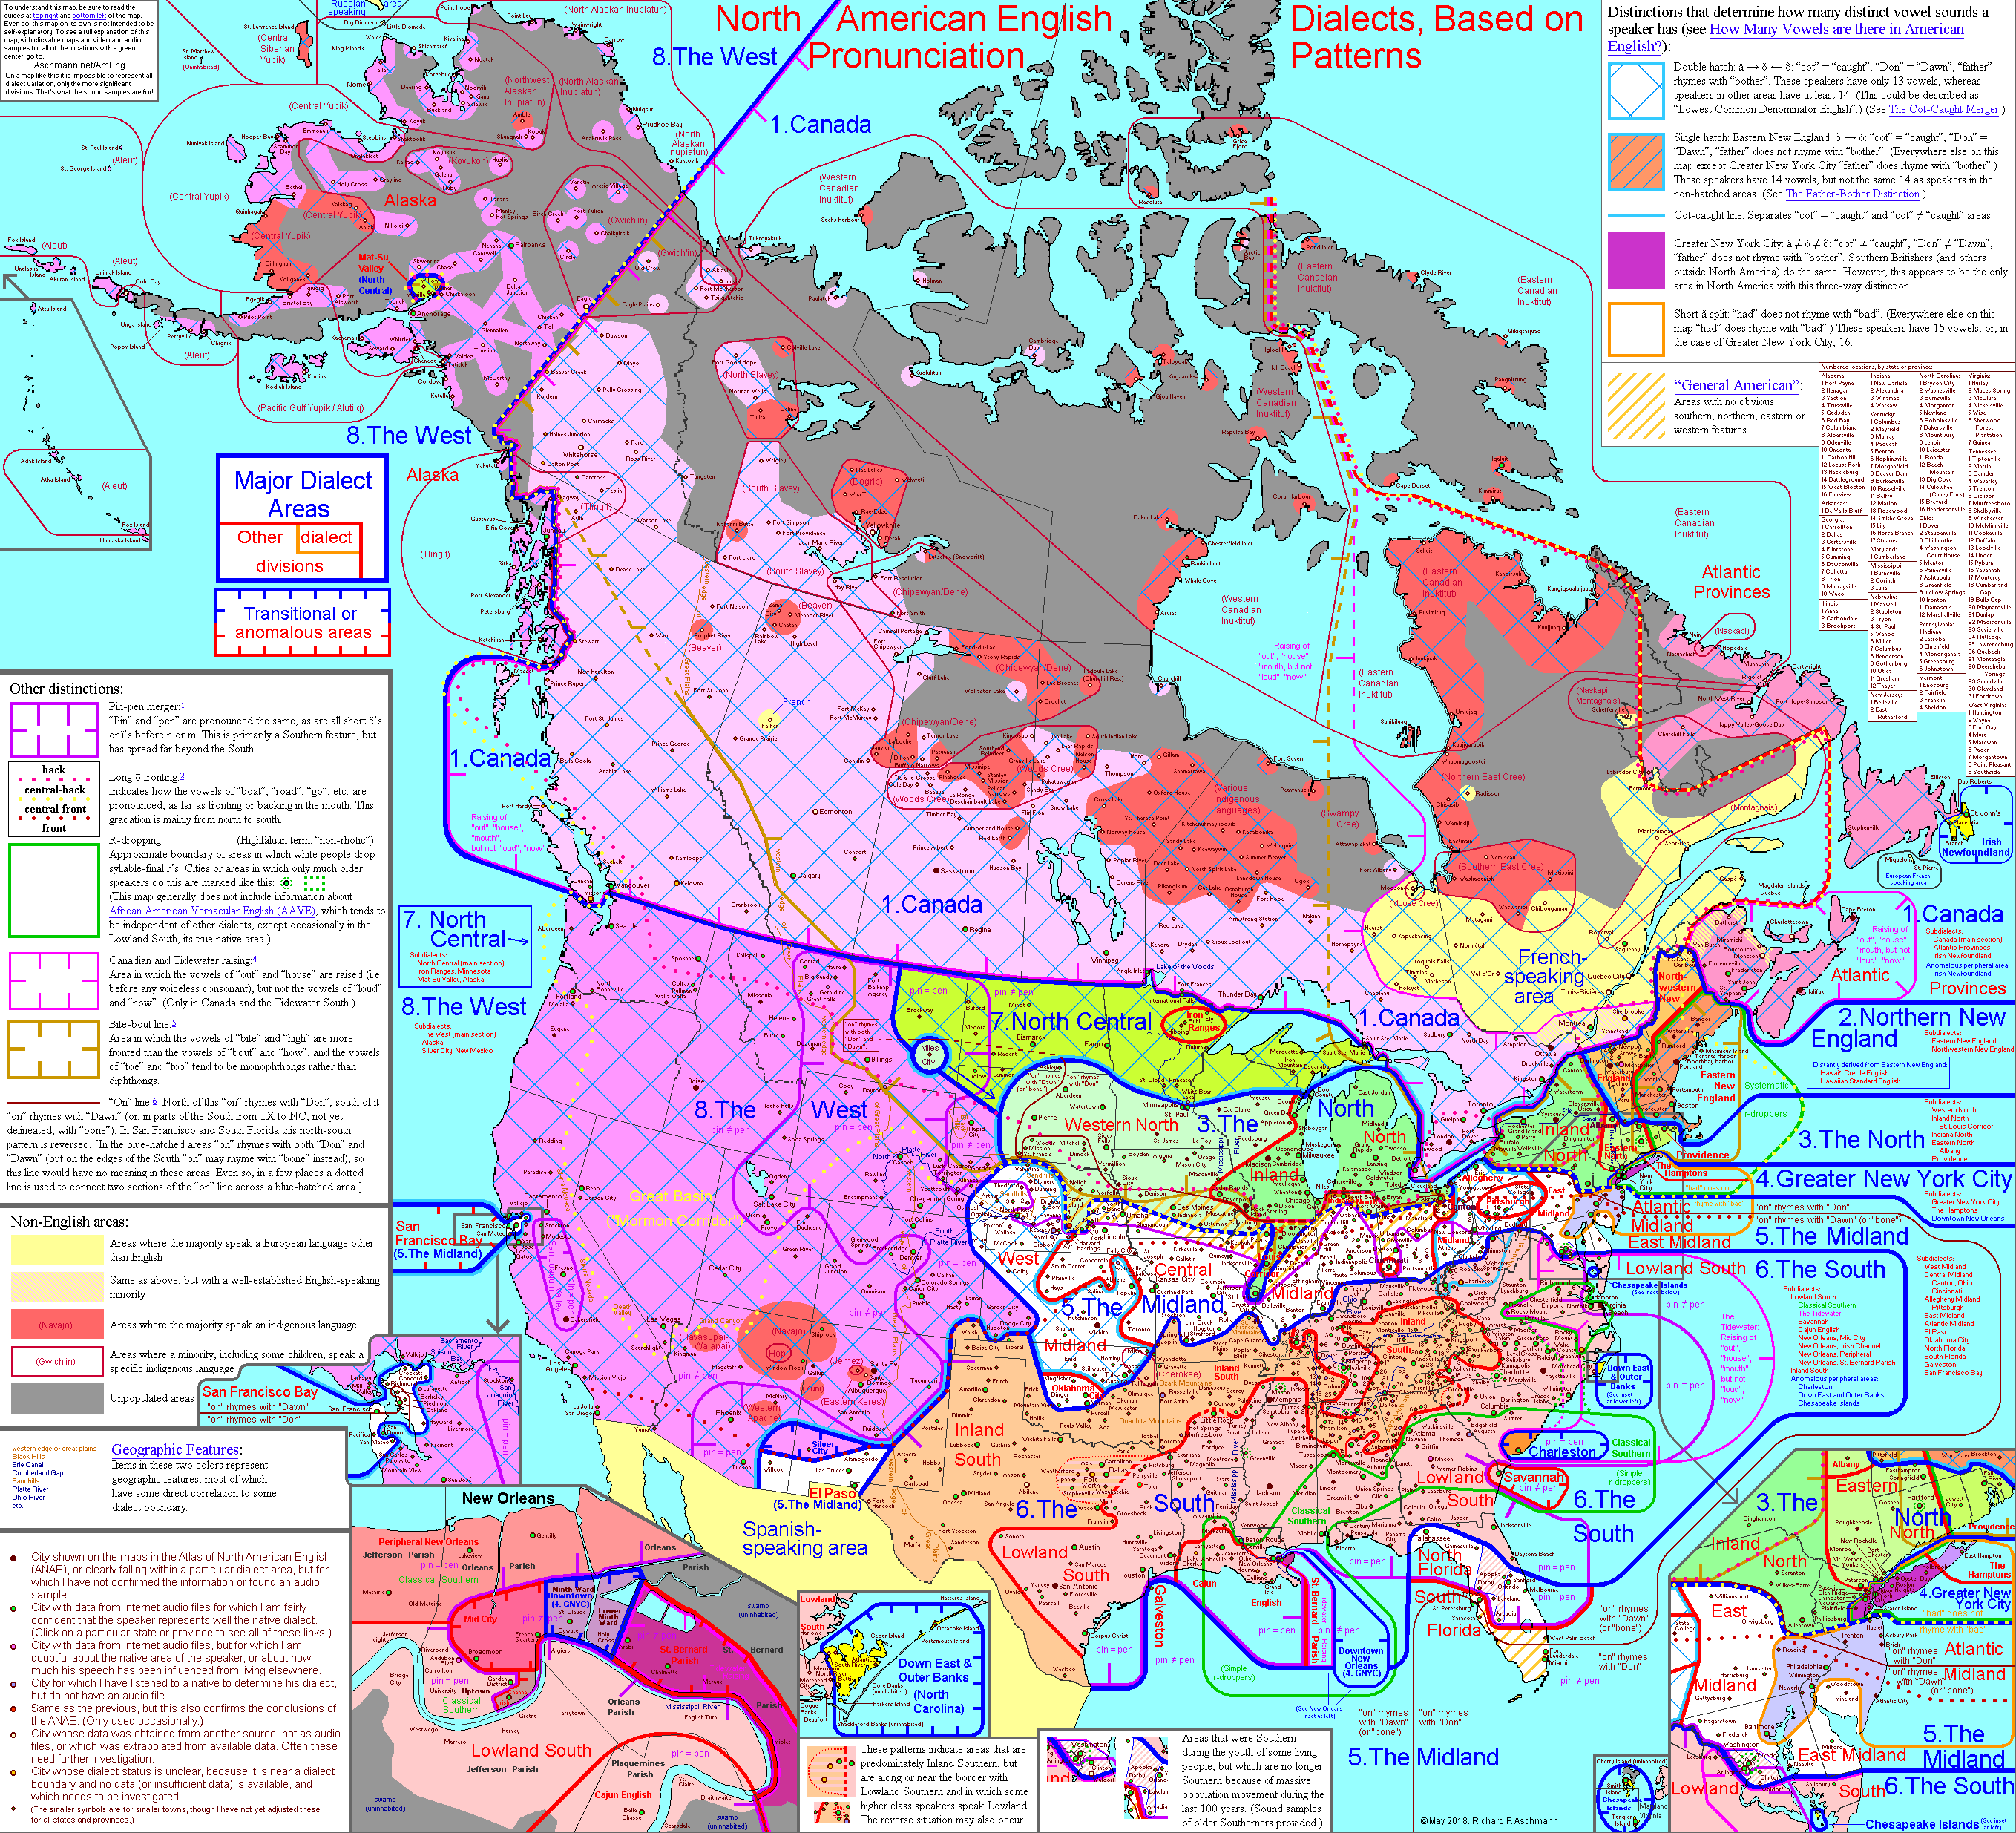 North American English Dialects